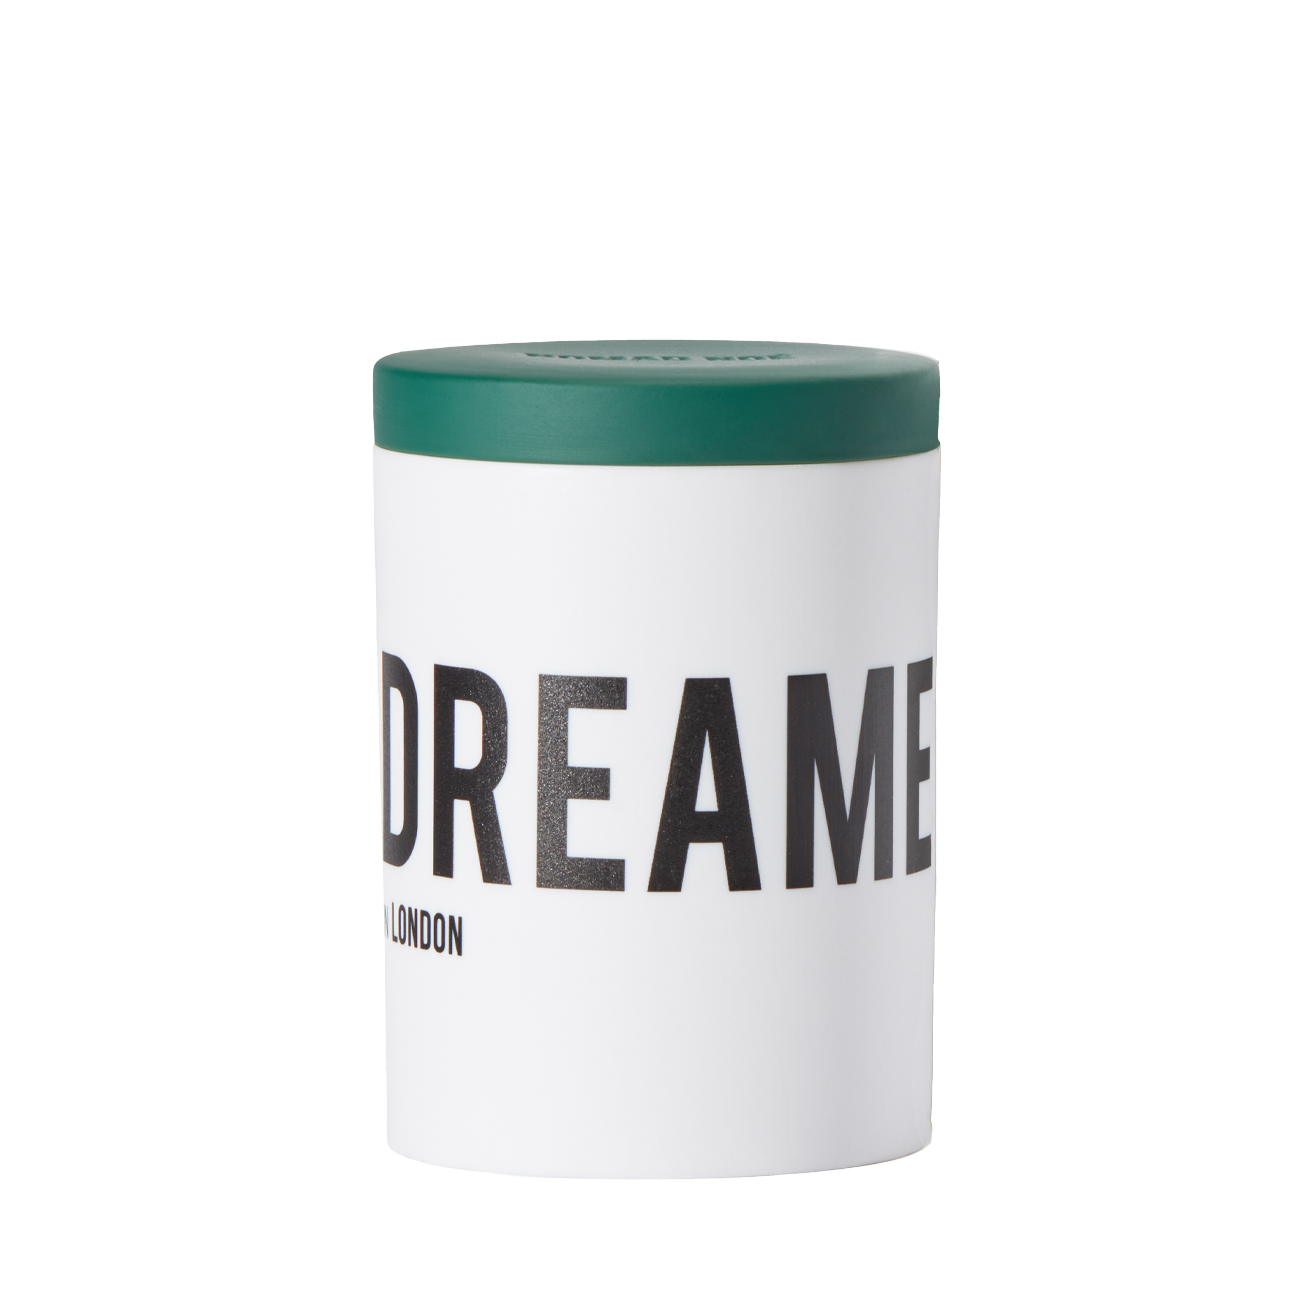 nomad noe dreamer in london candle